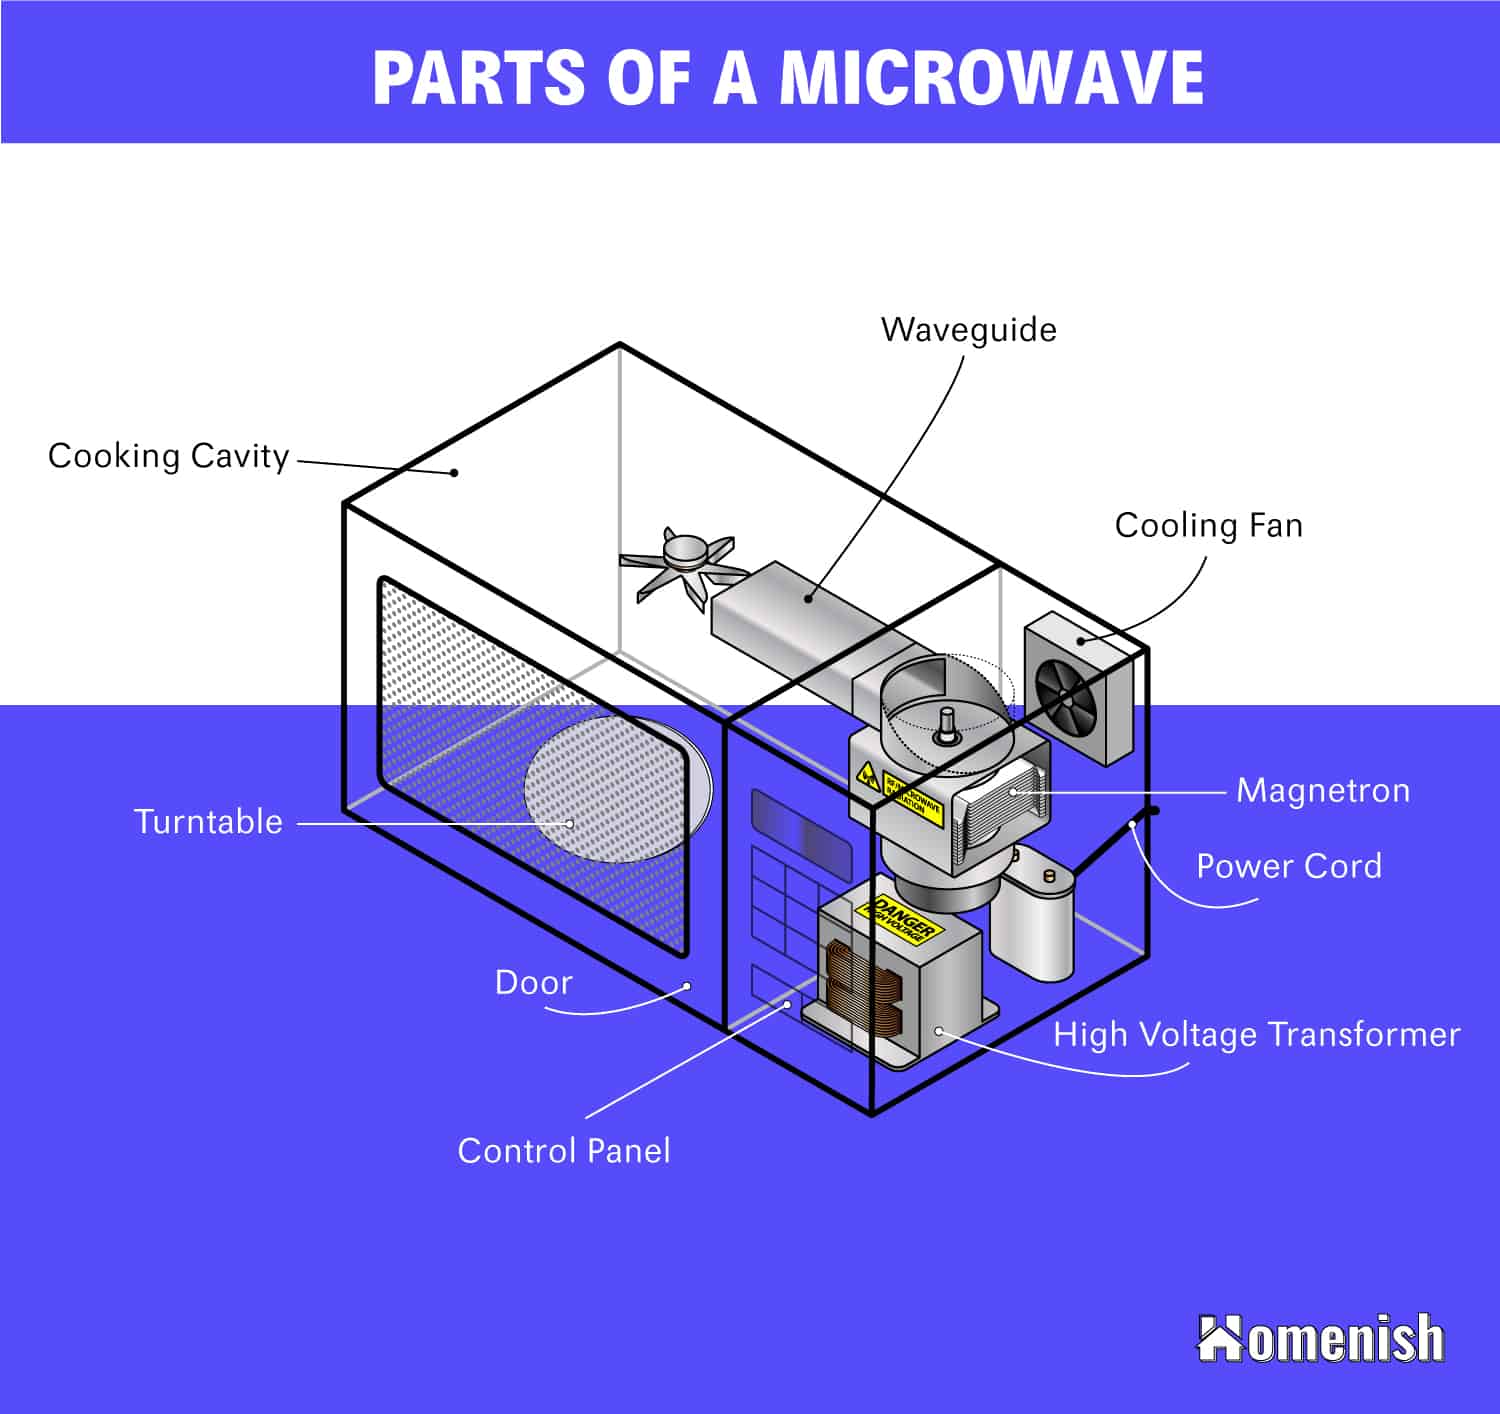 Parts of a Microwave